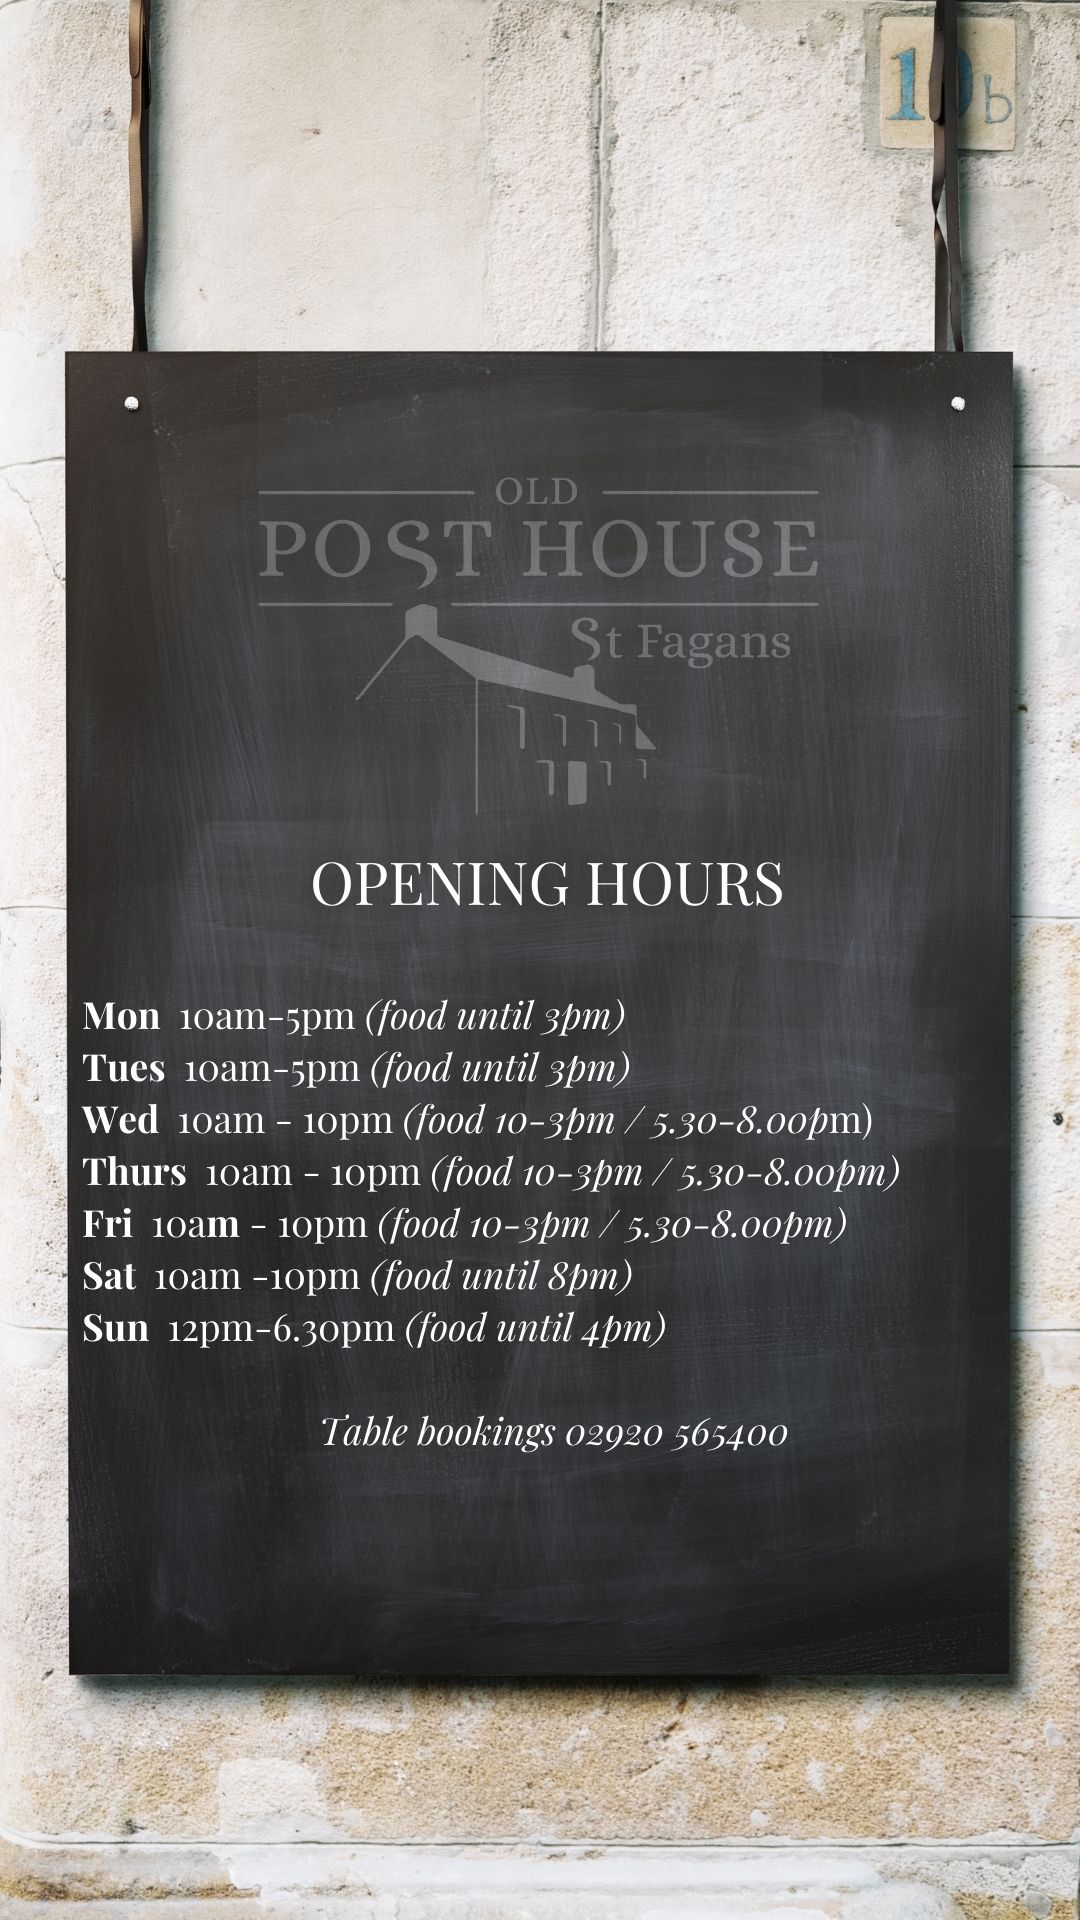  OPENing hours